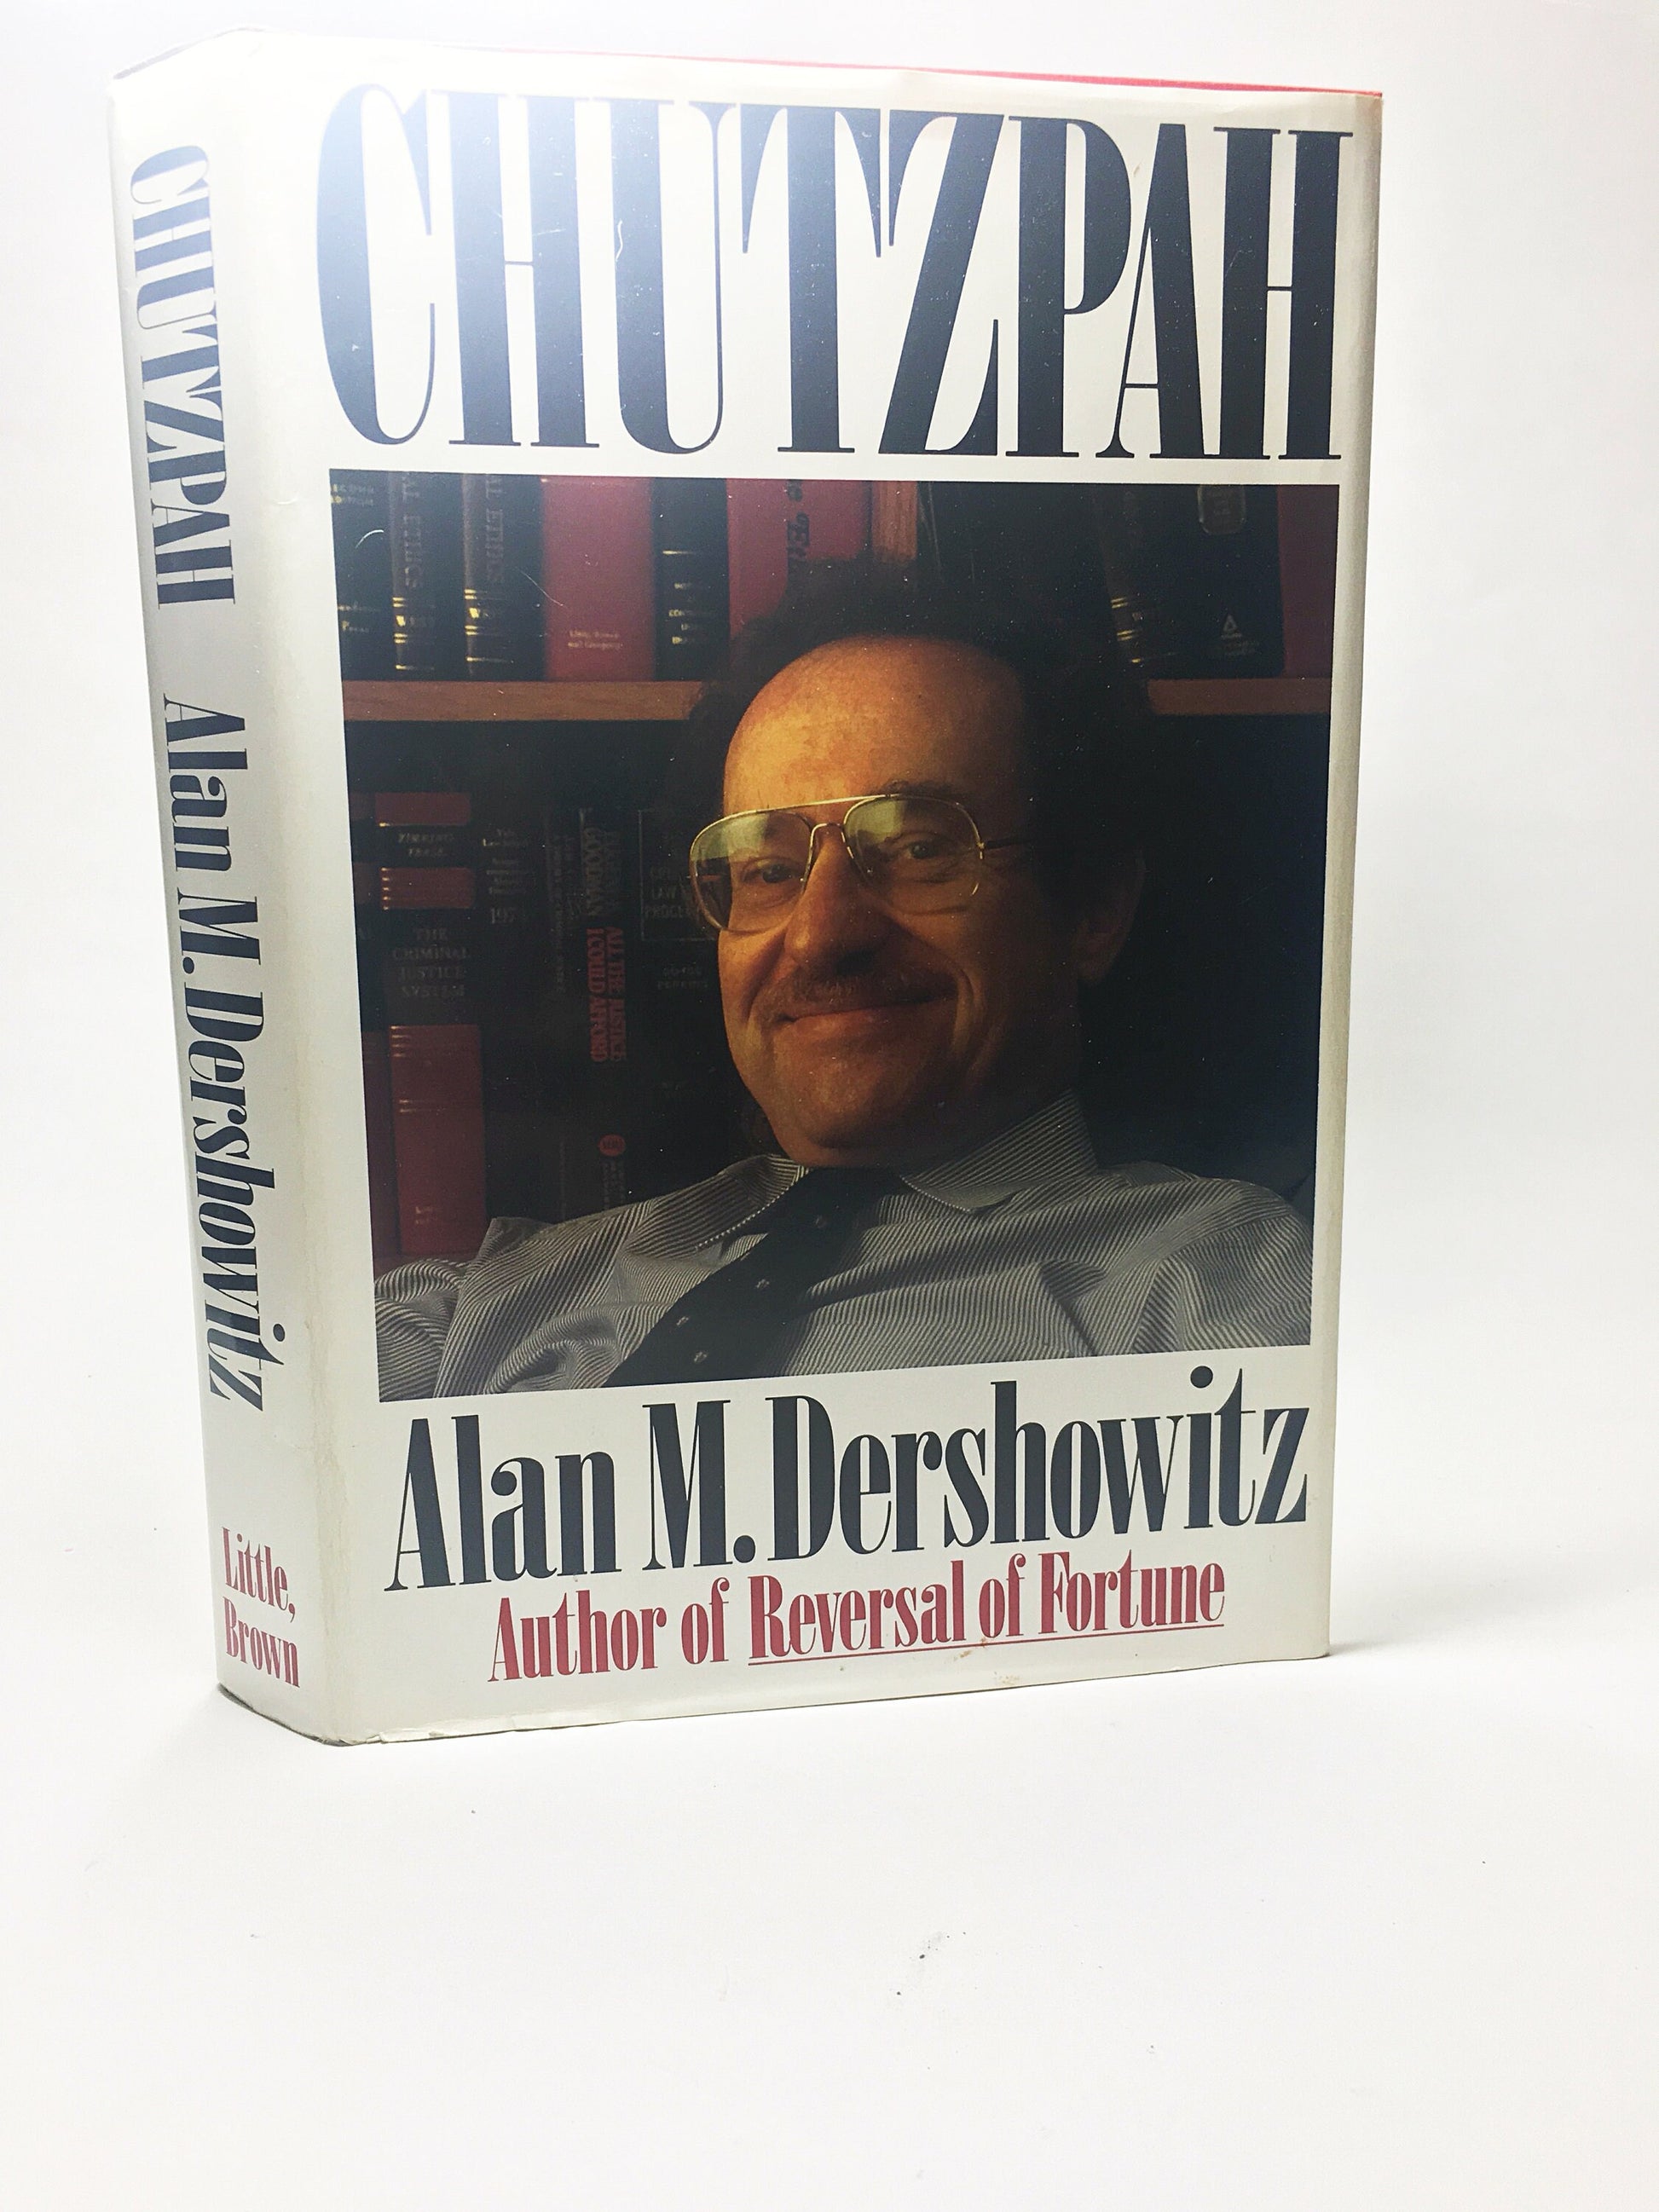 Chutzpah by Alan Dershowitz circa 1991. FIRST EDITION vintage book about expressing Judaism historically and today. Jewish identity. Gift